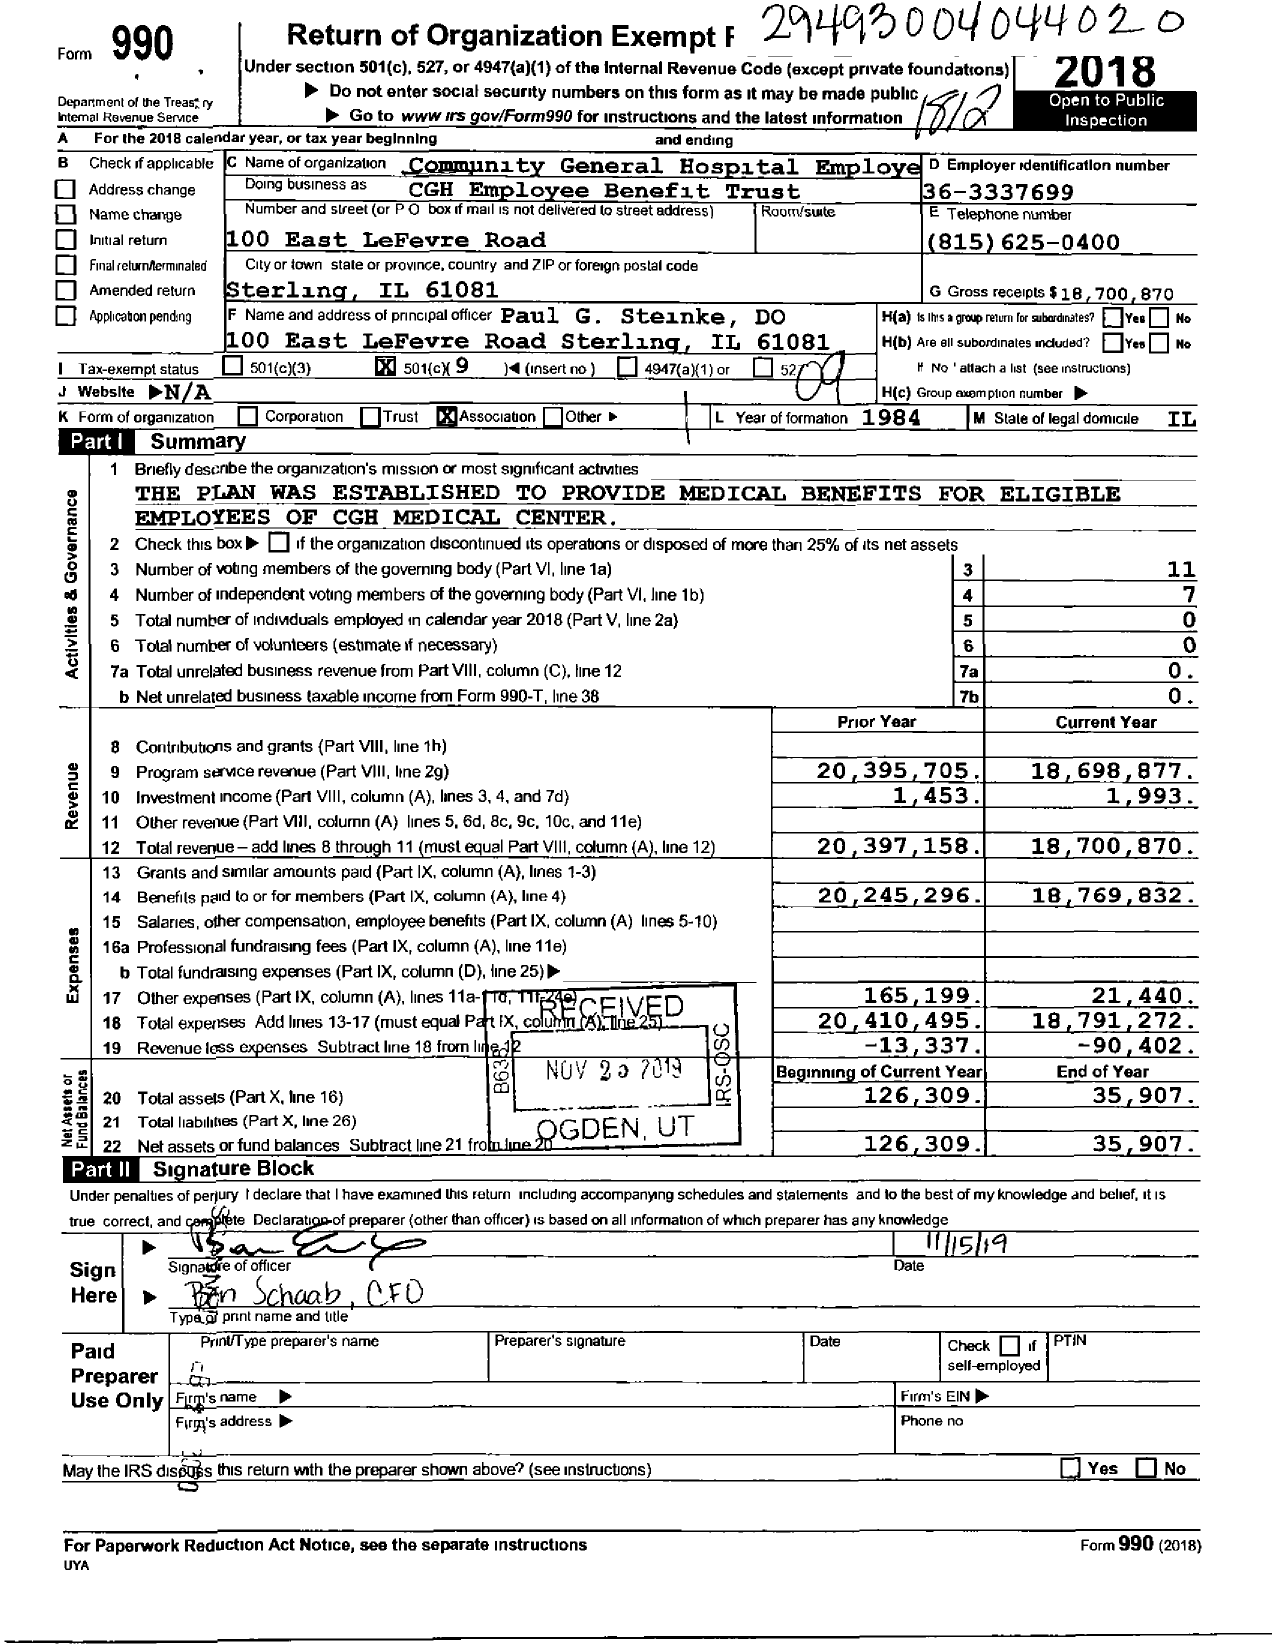 Image of first page of 2018 Form 990O for Community General Hospital Employee Benefit Trust CGH Employee Benefit Trust